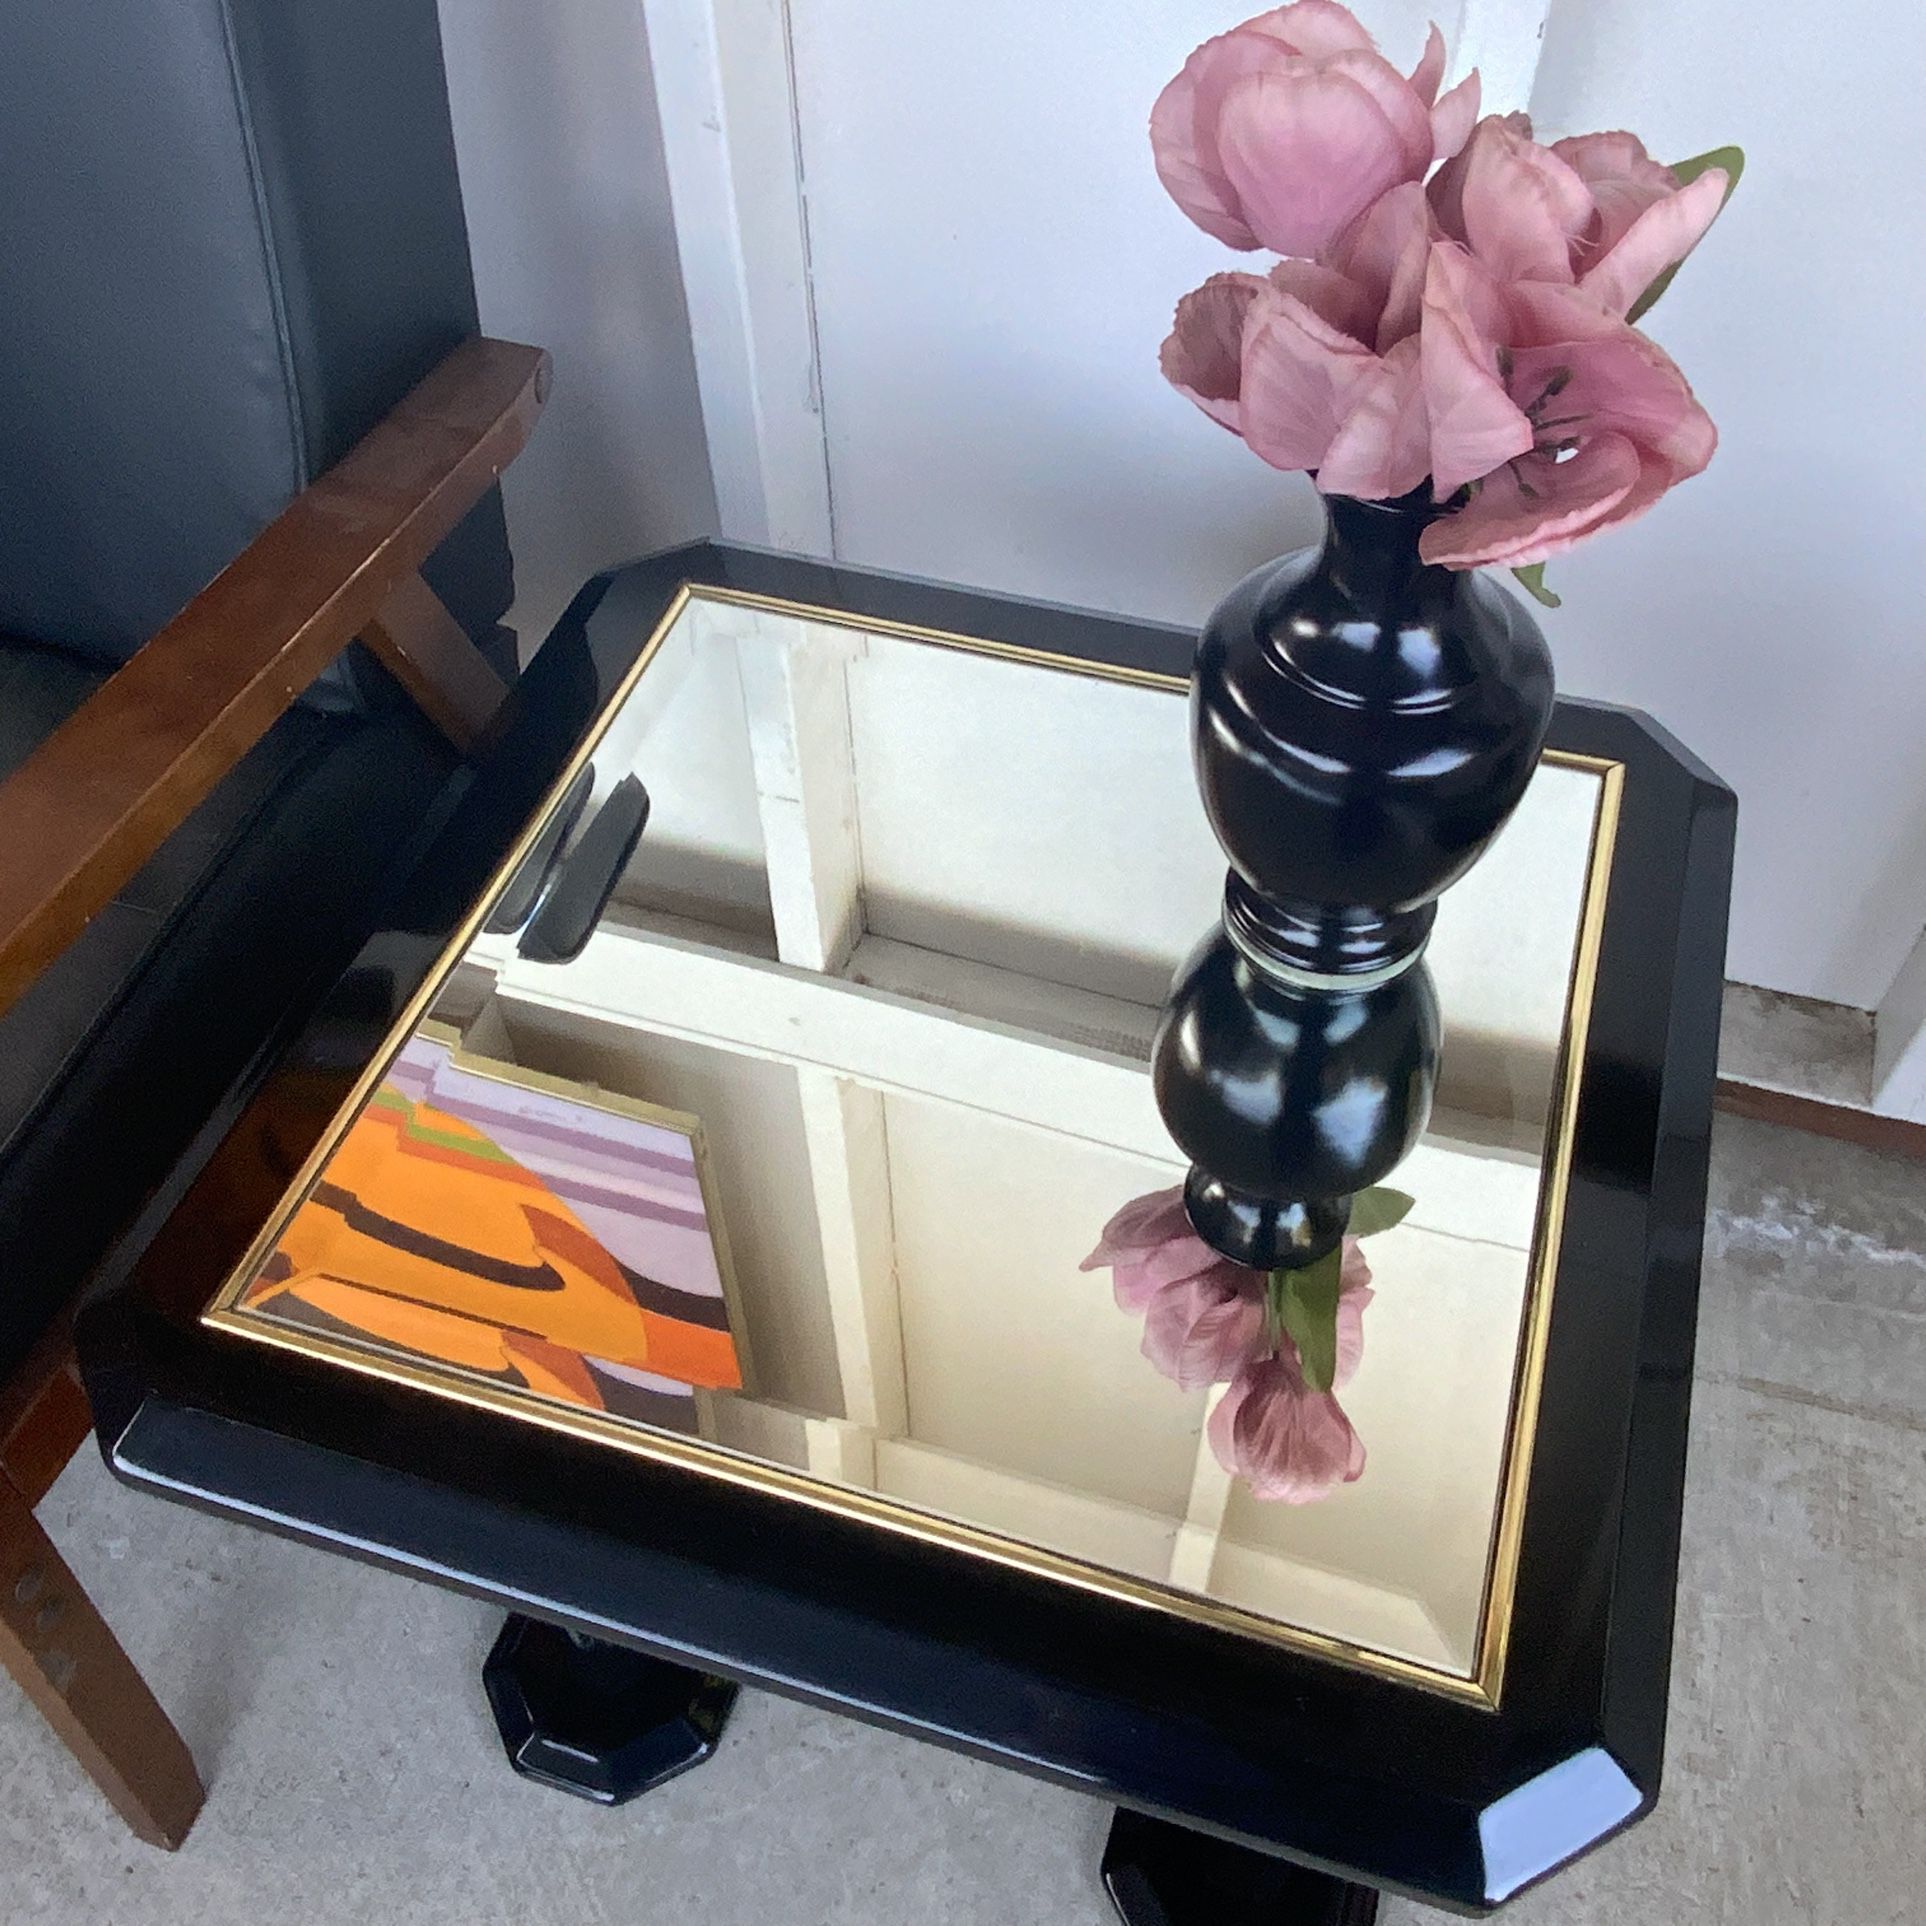 Louis Vuitton Coffee Table Book for Sale in Woodinville, WA - OfferUp